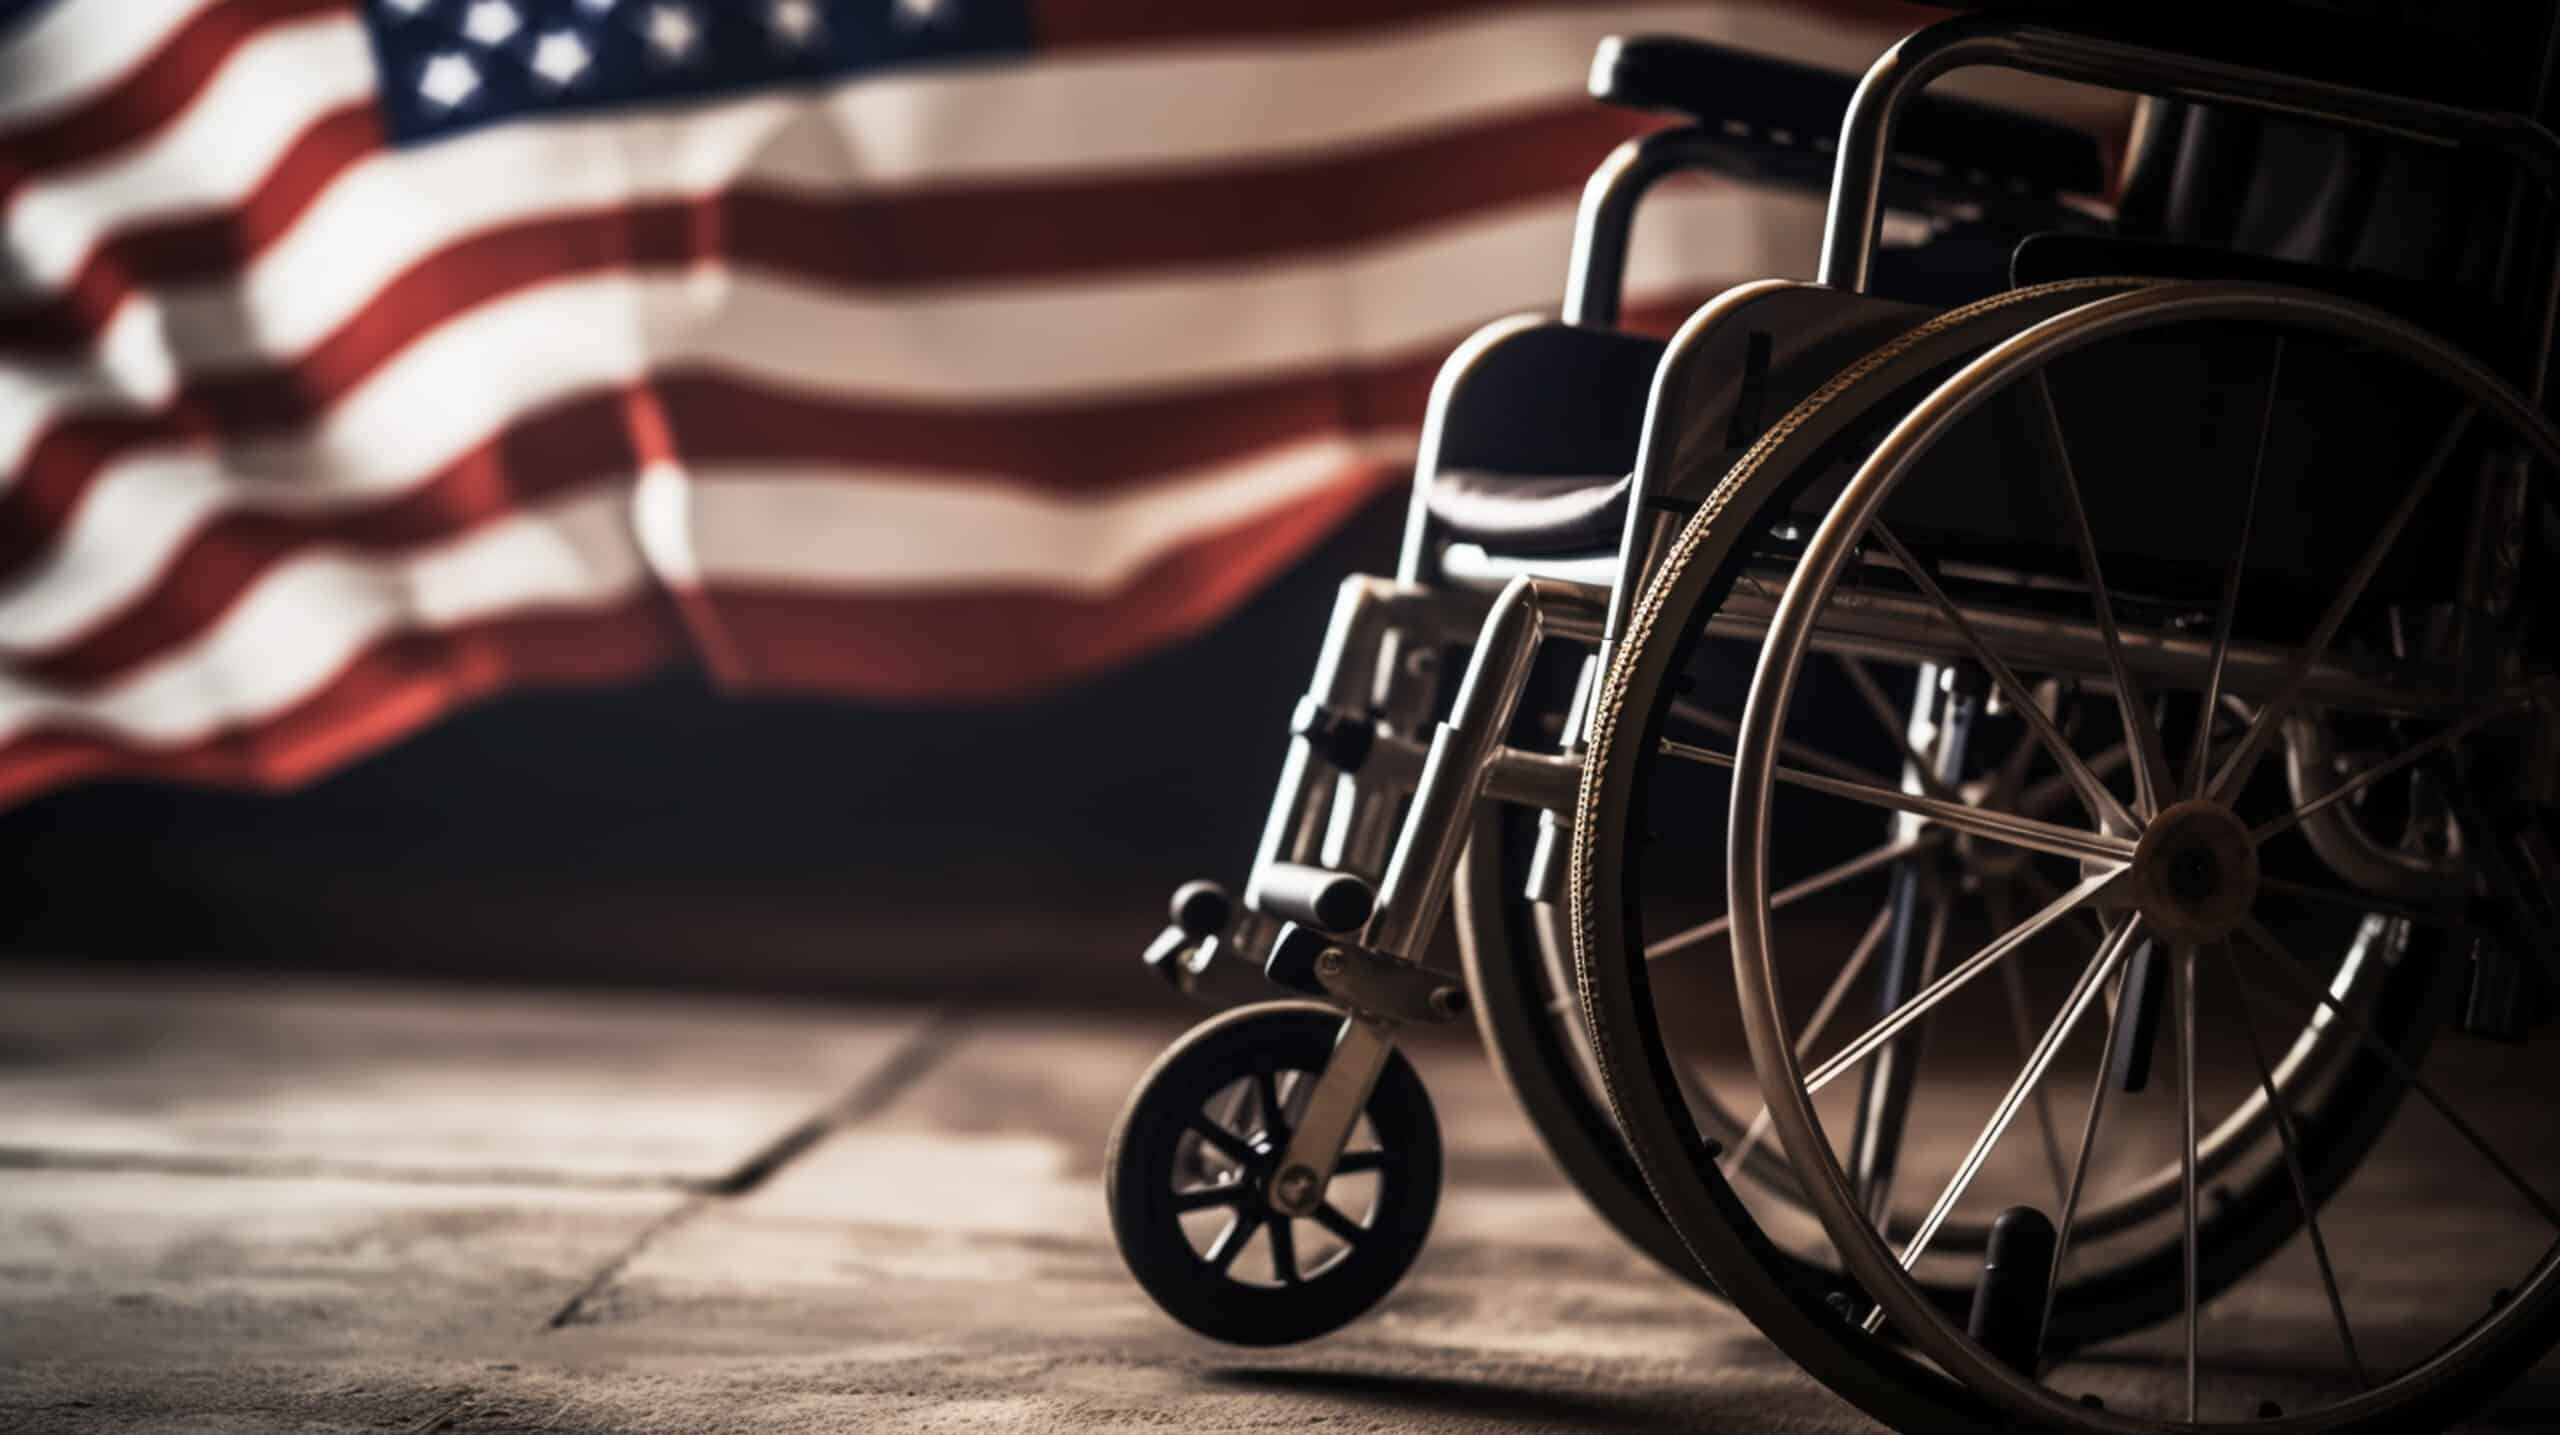 The Guide to Handicap Veterans in Florida